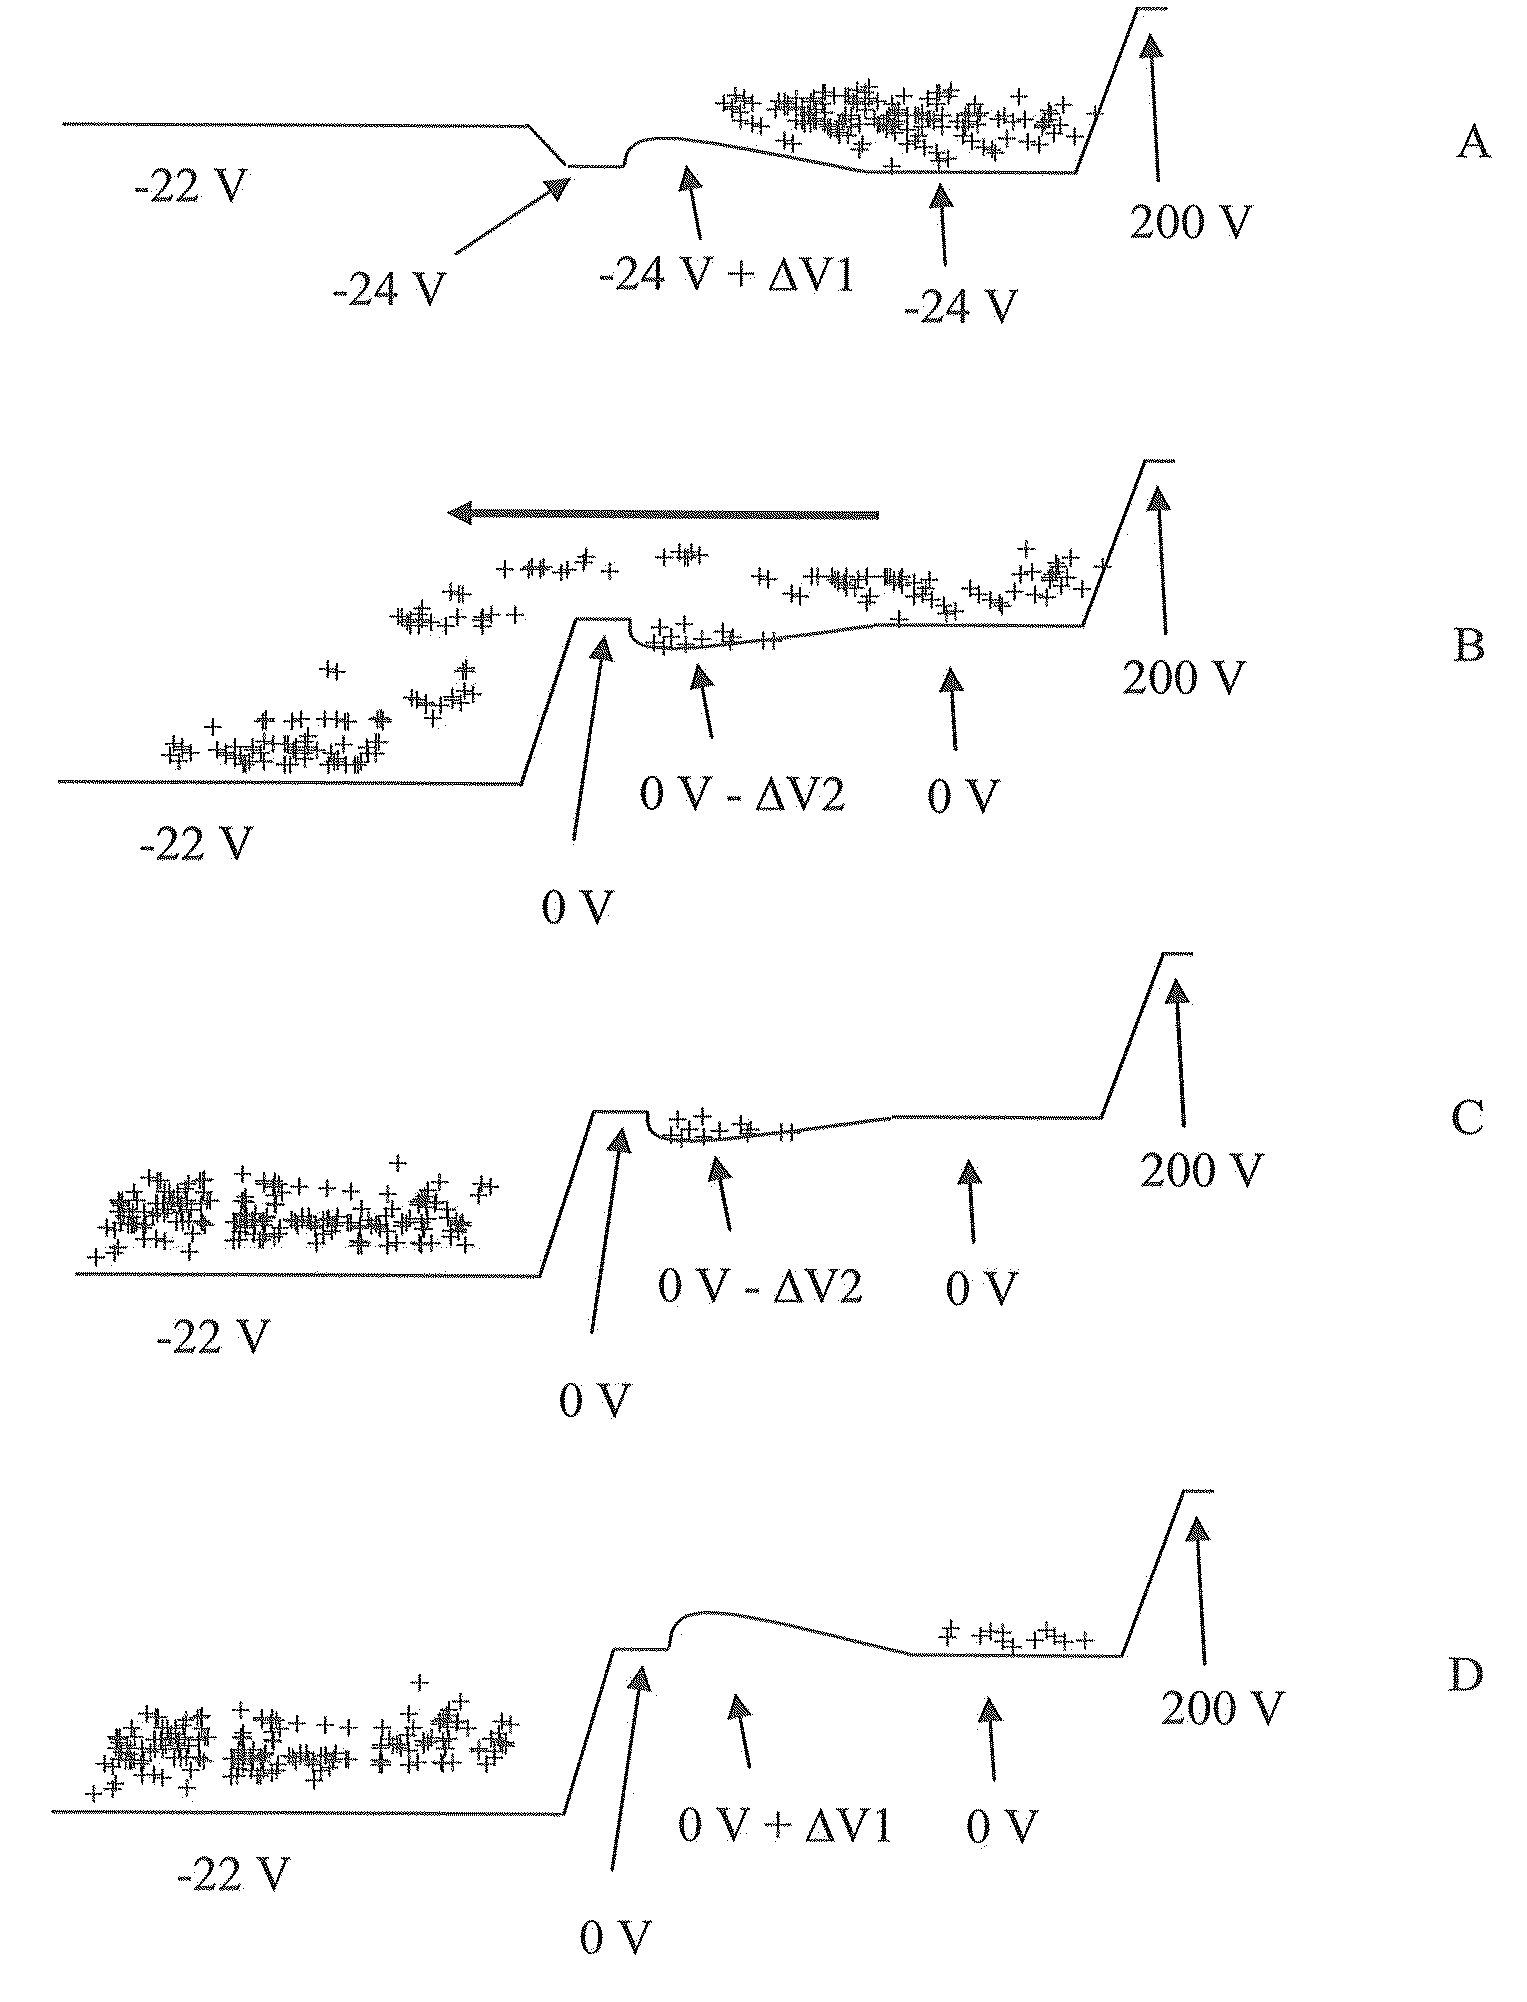 Method and apparatus for reducing space charge in an ion trap